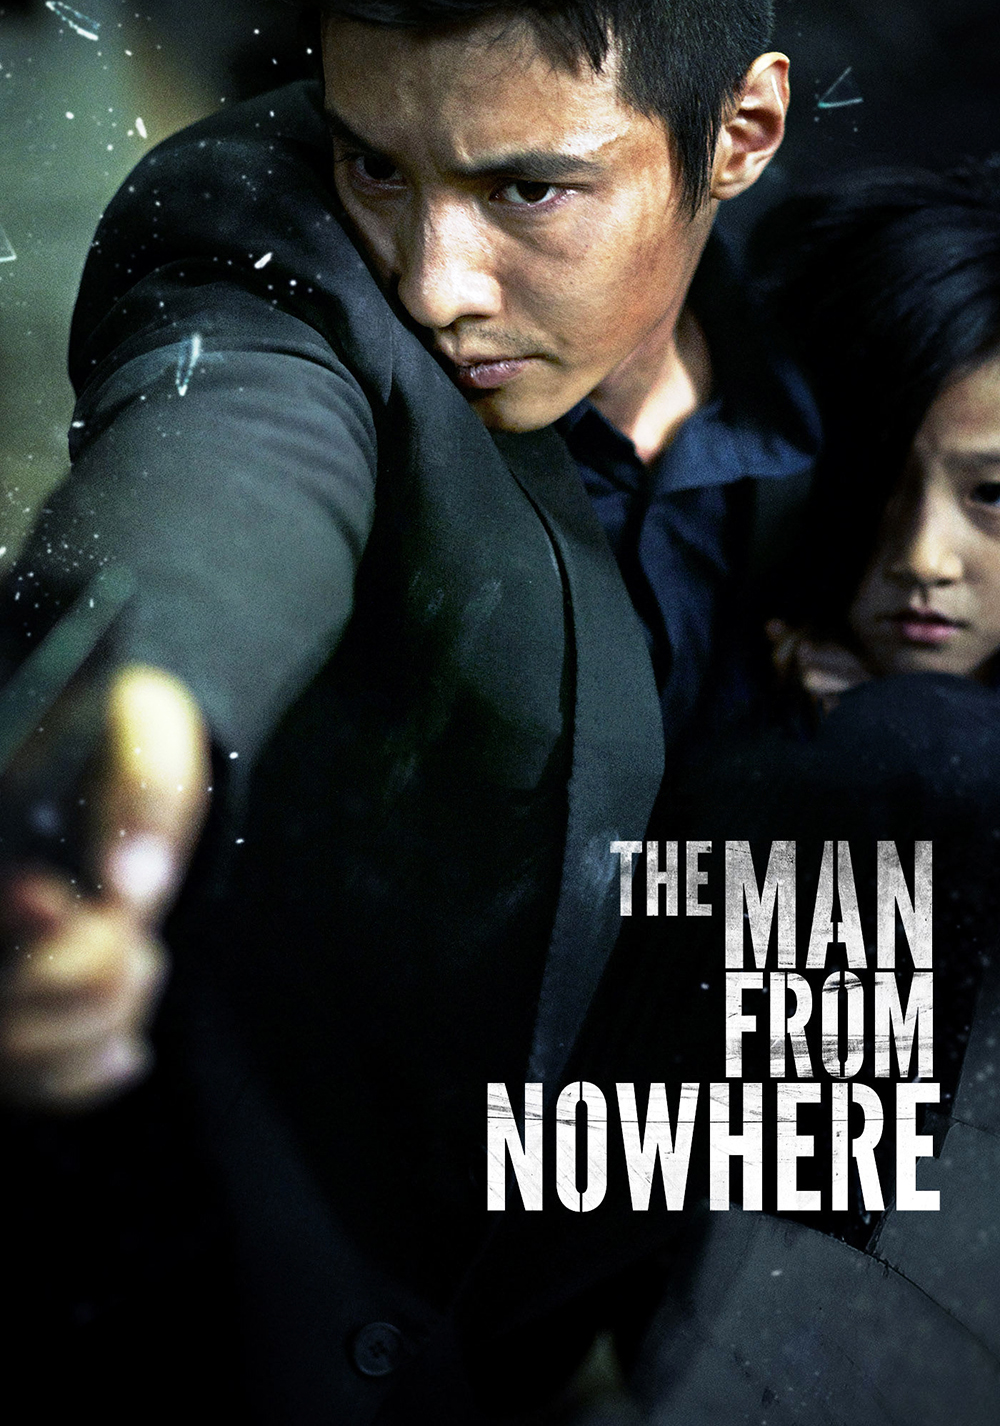 The man from nowhere full movie download